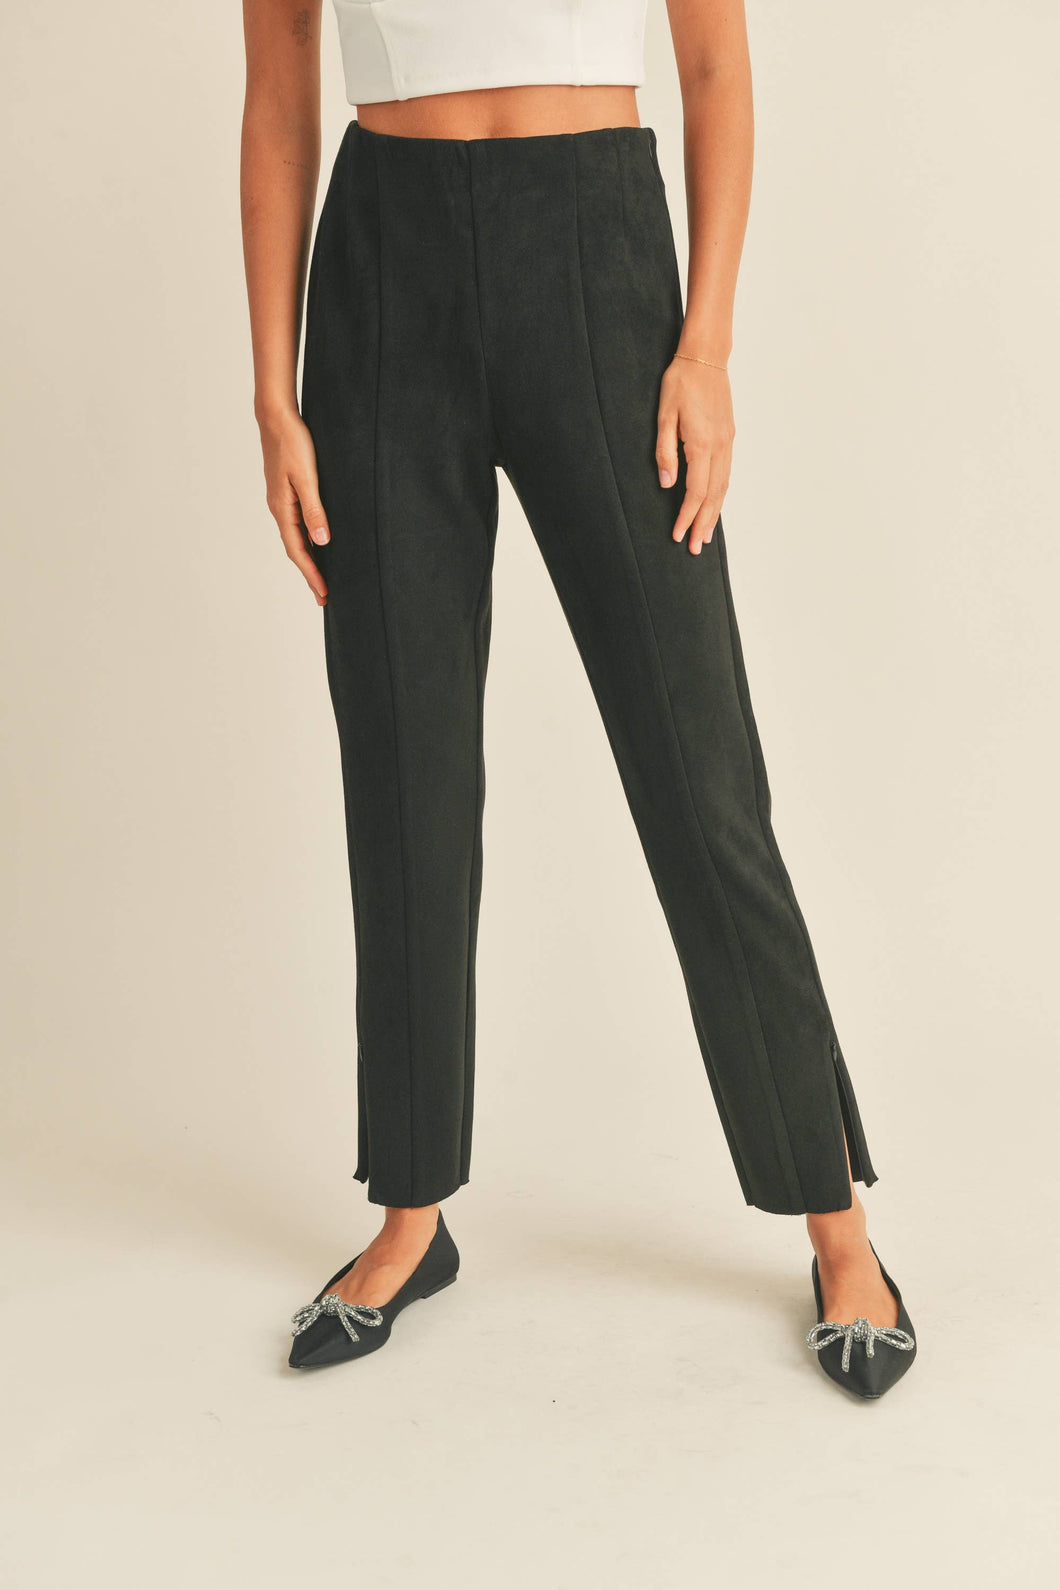 MIOU MUSE - SUEDE PANTS WITH ELASTIC BAND WAIST